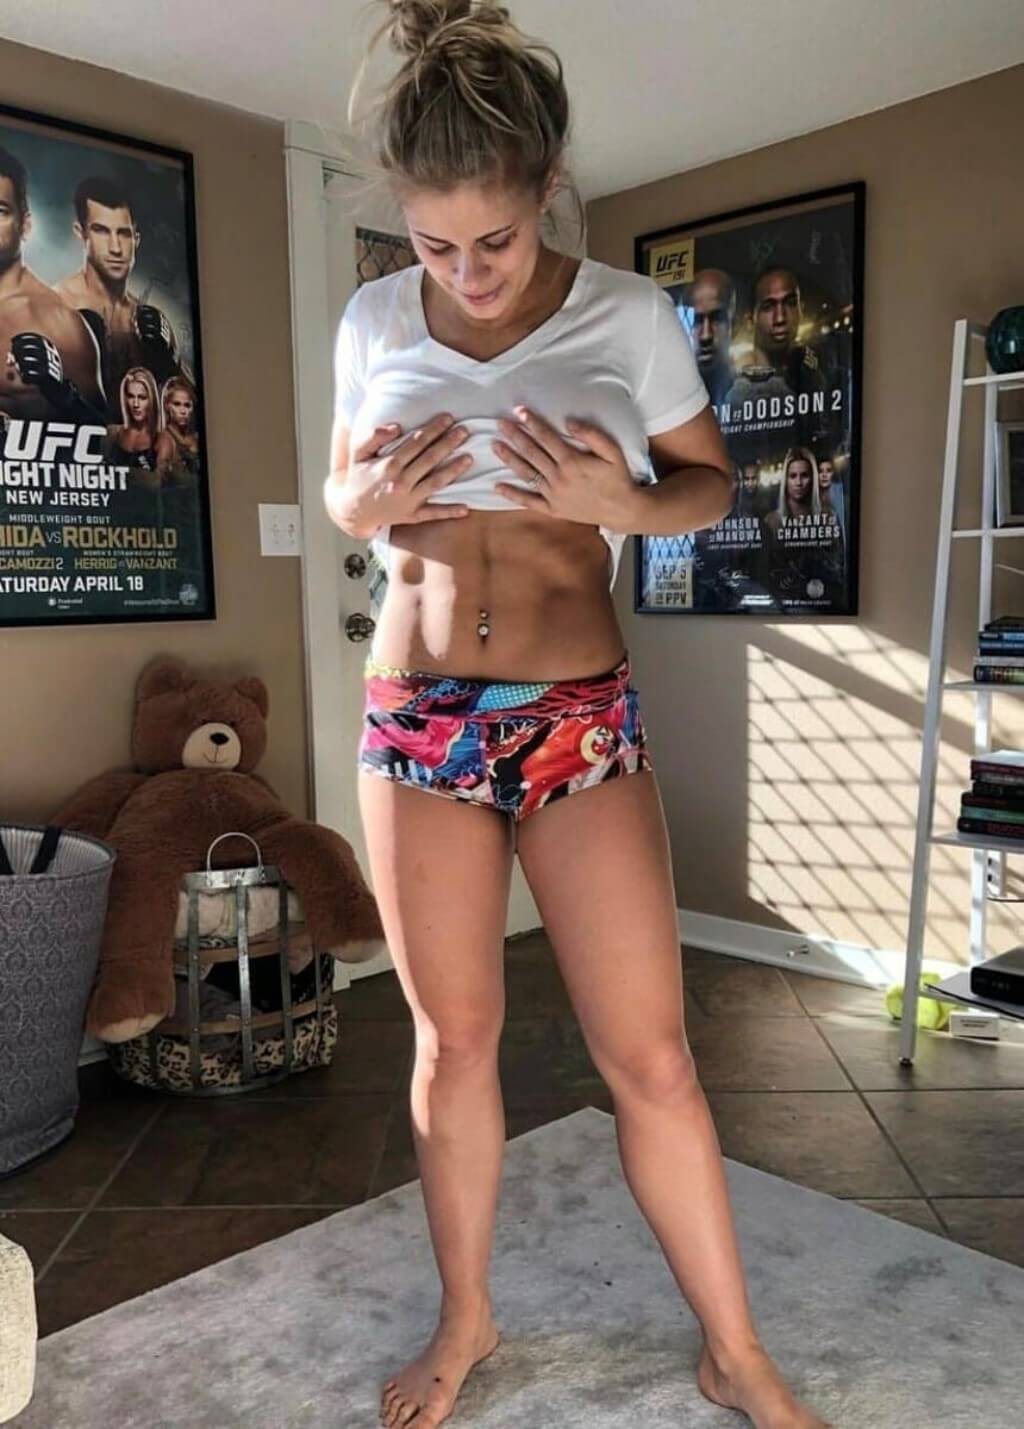 Fighter nude female mma The Top